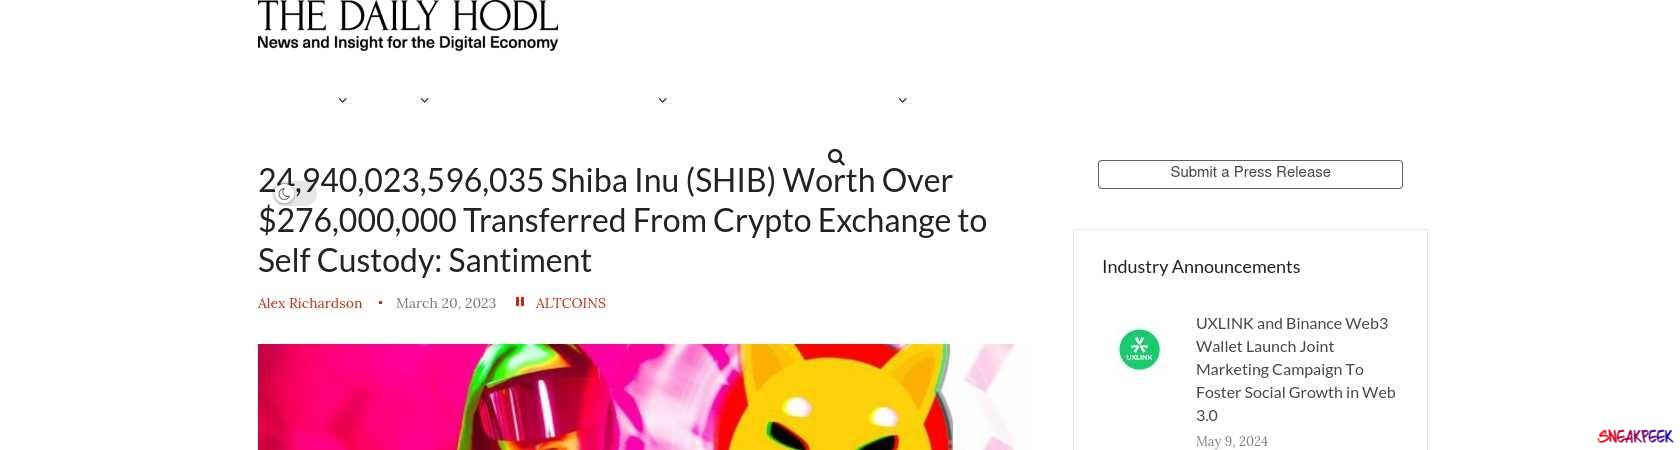 Read the full Article:  ⭲ 24,940,023,596,035 Shiba Inu (SHIB) Worth Over $276,000,000 Transferred From Crypto Exchange to Self Custody: Santiment